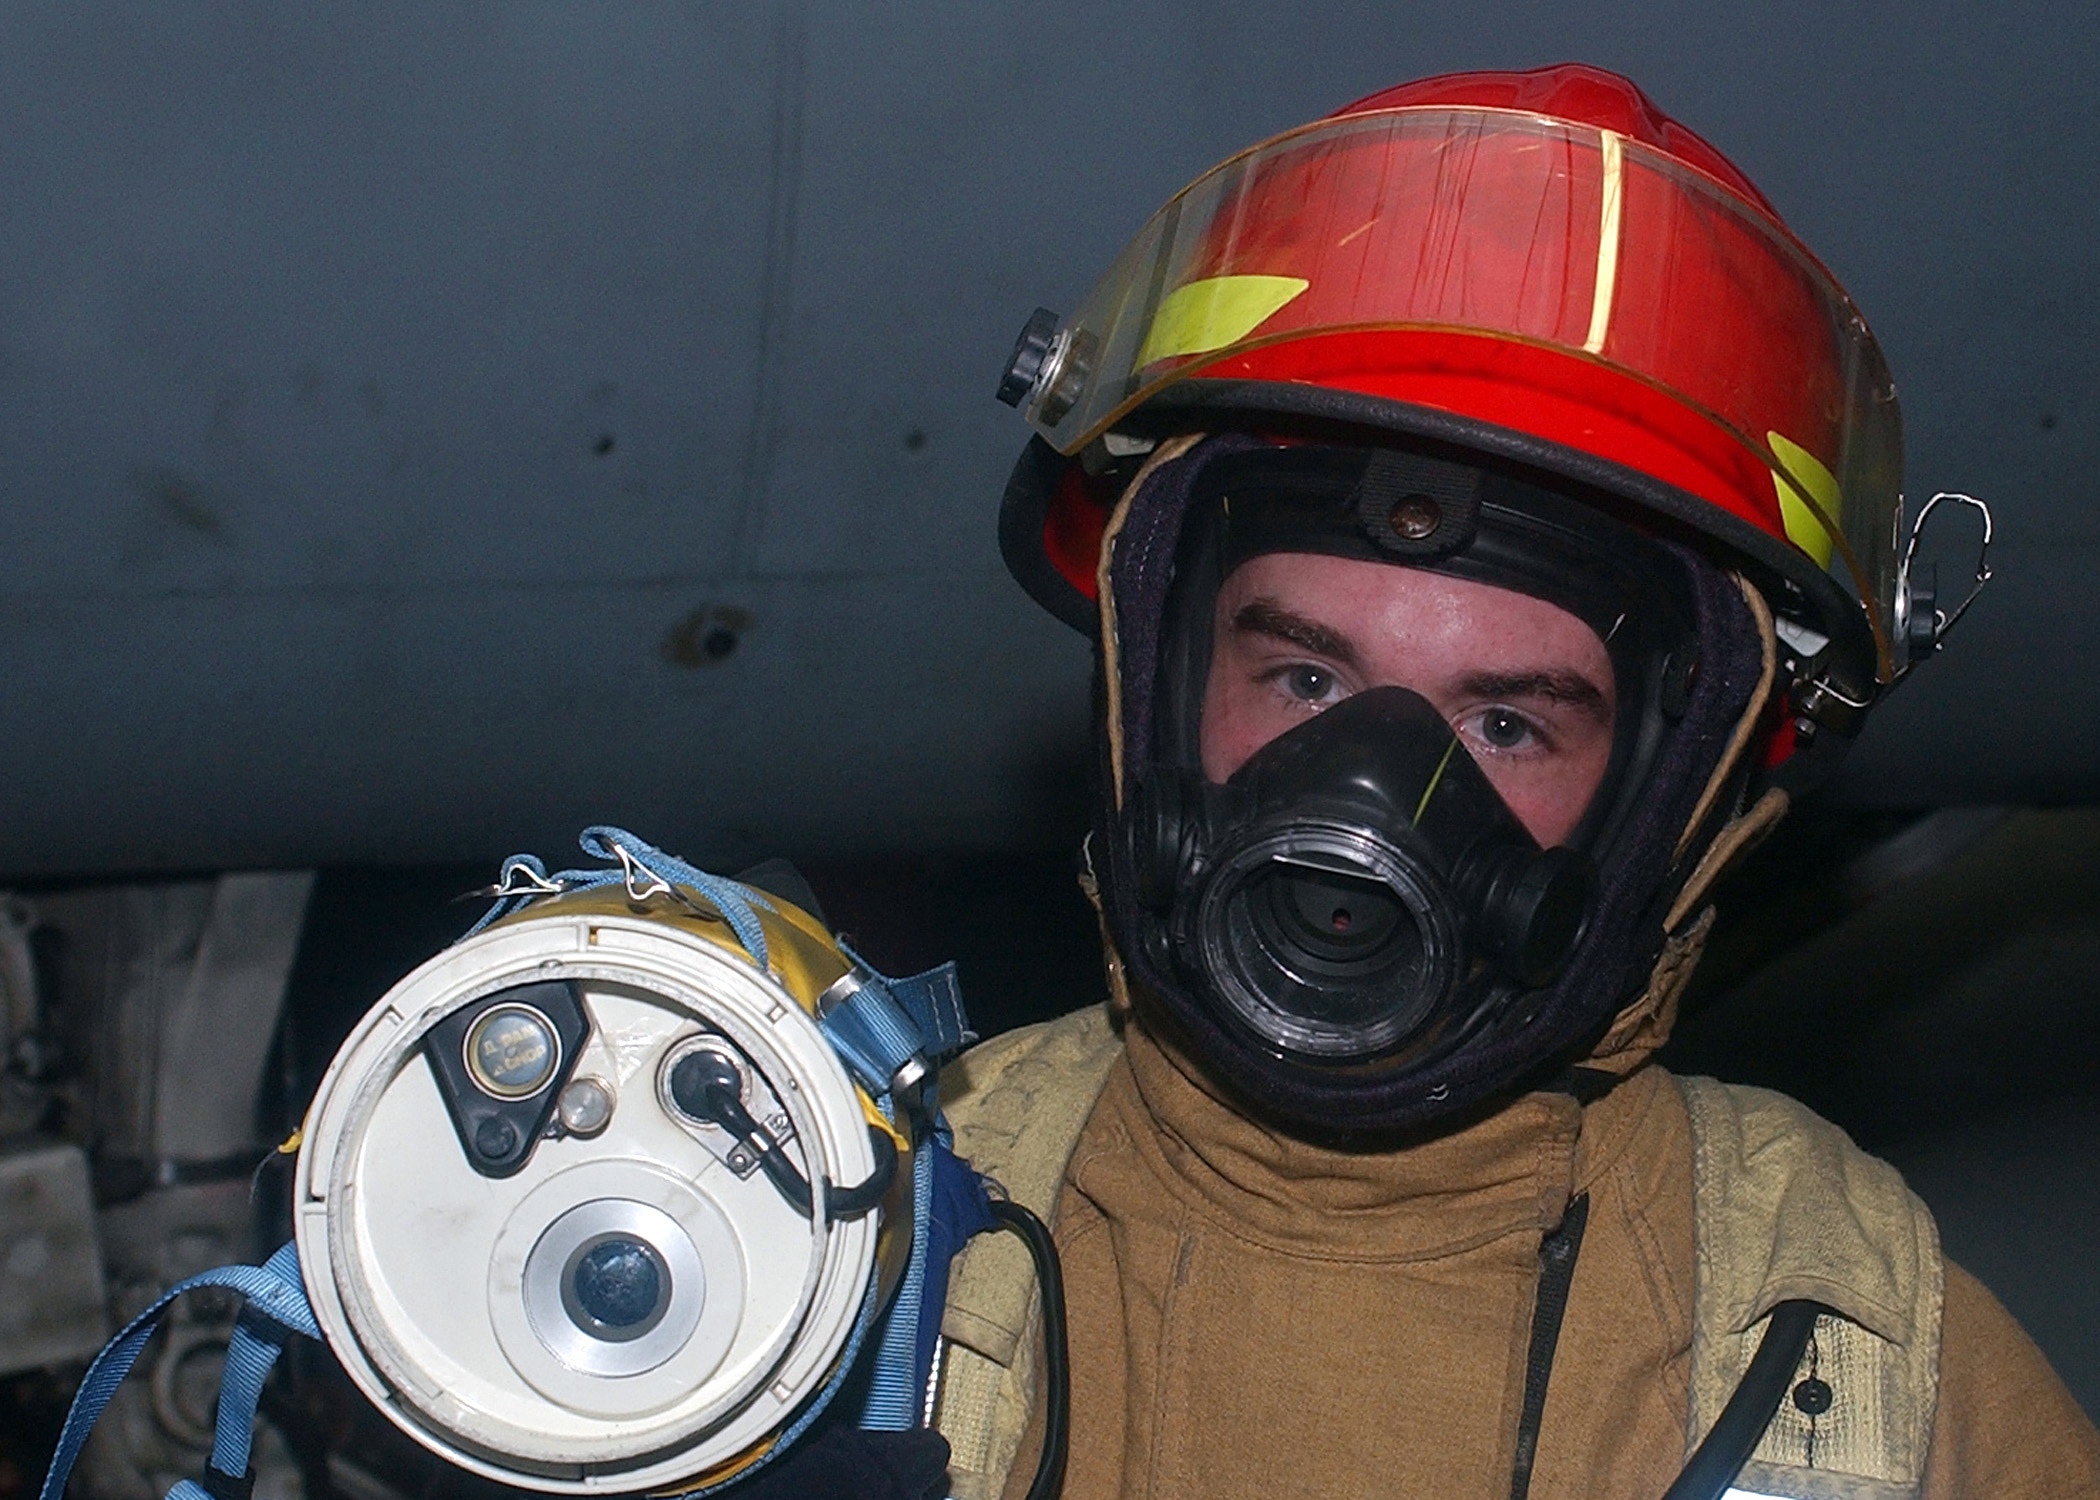 US Navy 041115-N-6125G-006 Fireman Brandon Dossey uses a Naval Firefighters Thermal Imaging (NFTI) system during a fire drill aboard the Nimitz-class aircraft carrier USS Harry S. Truman (CVN 75)